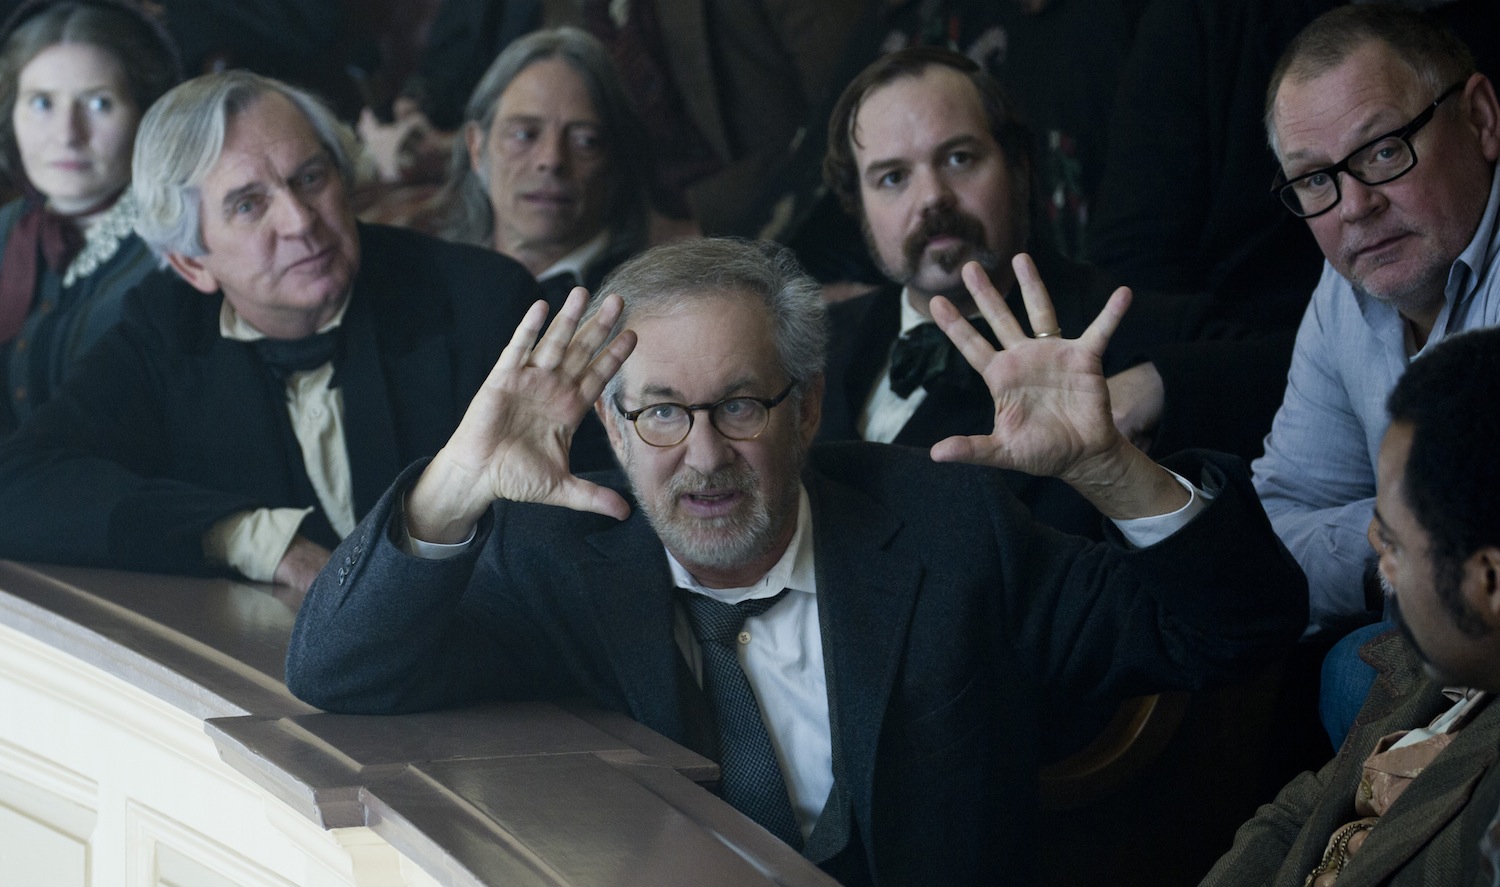 https://voyages.ideoz.fr/wp-content/plugins/wp-o-matic/cache/b0a2ef7fb0_spielberg-directing-lincoln1.jpg